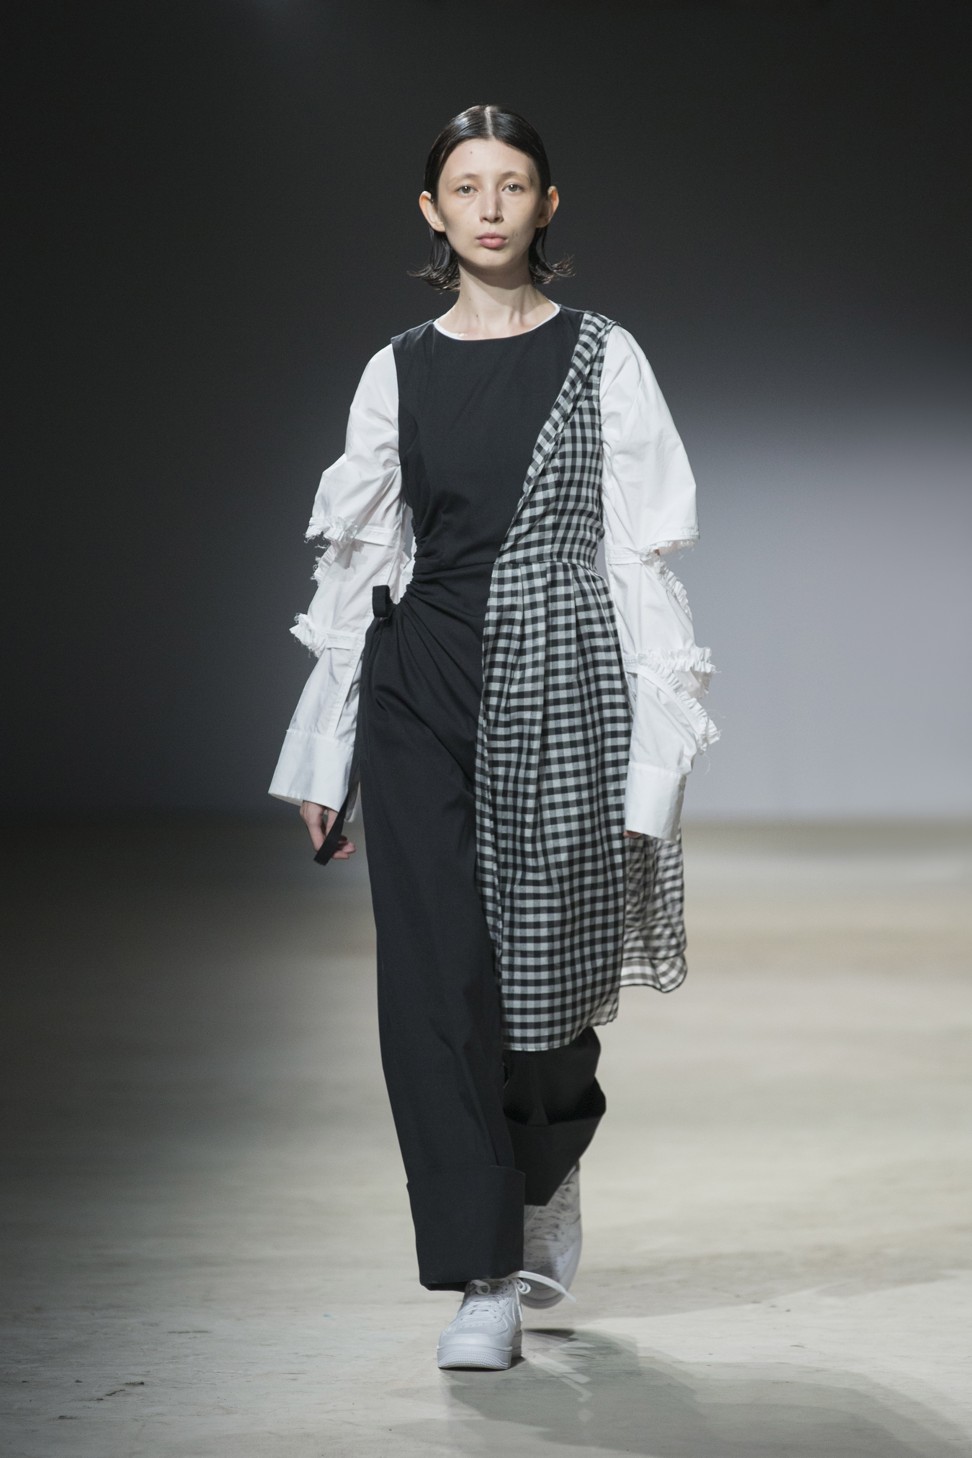 Highlights from Shanghai Fashion Week: future sports, androgyny | South ...